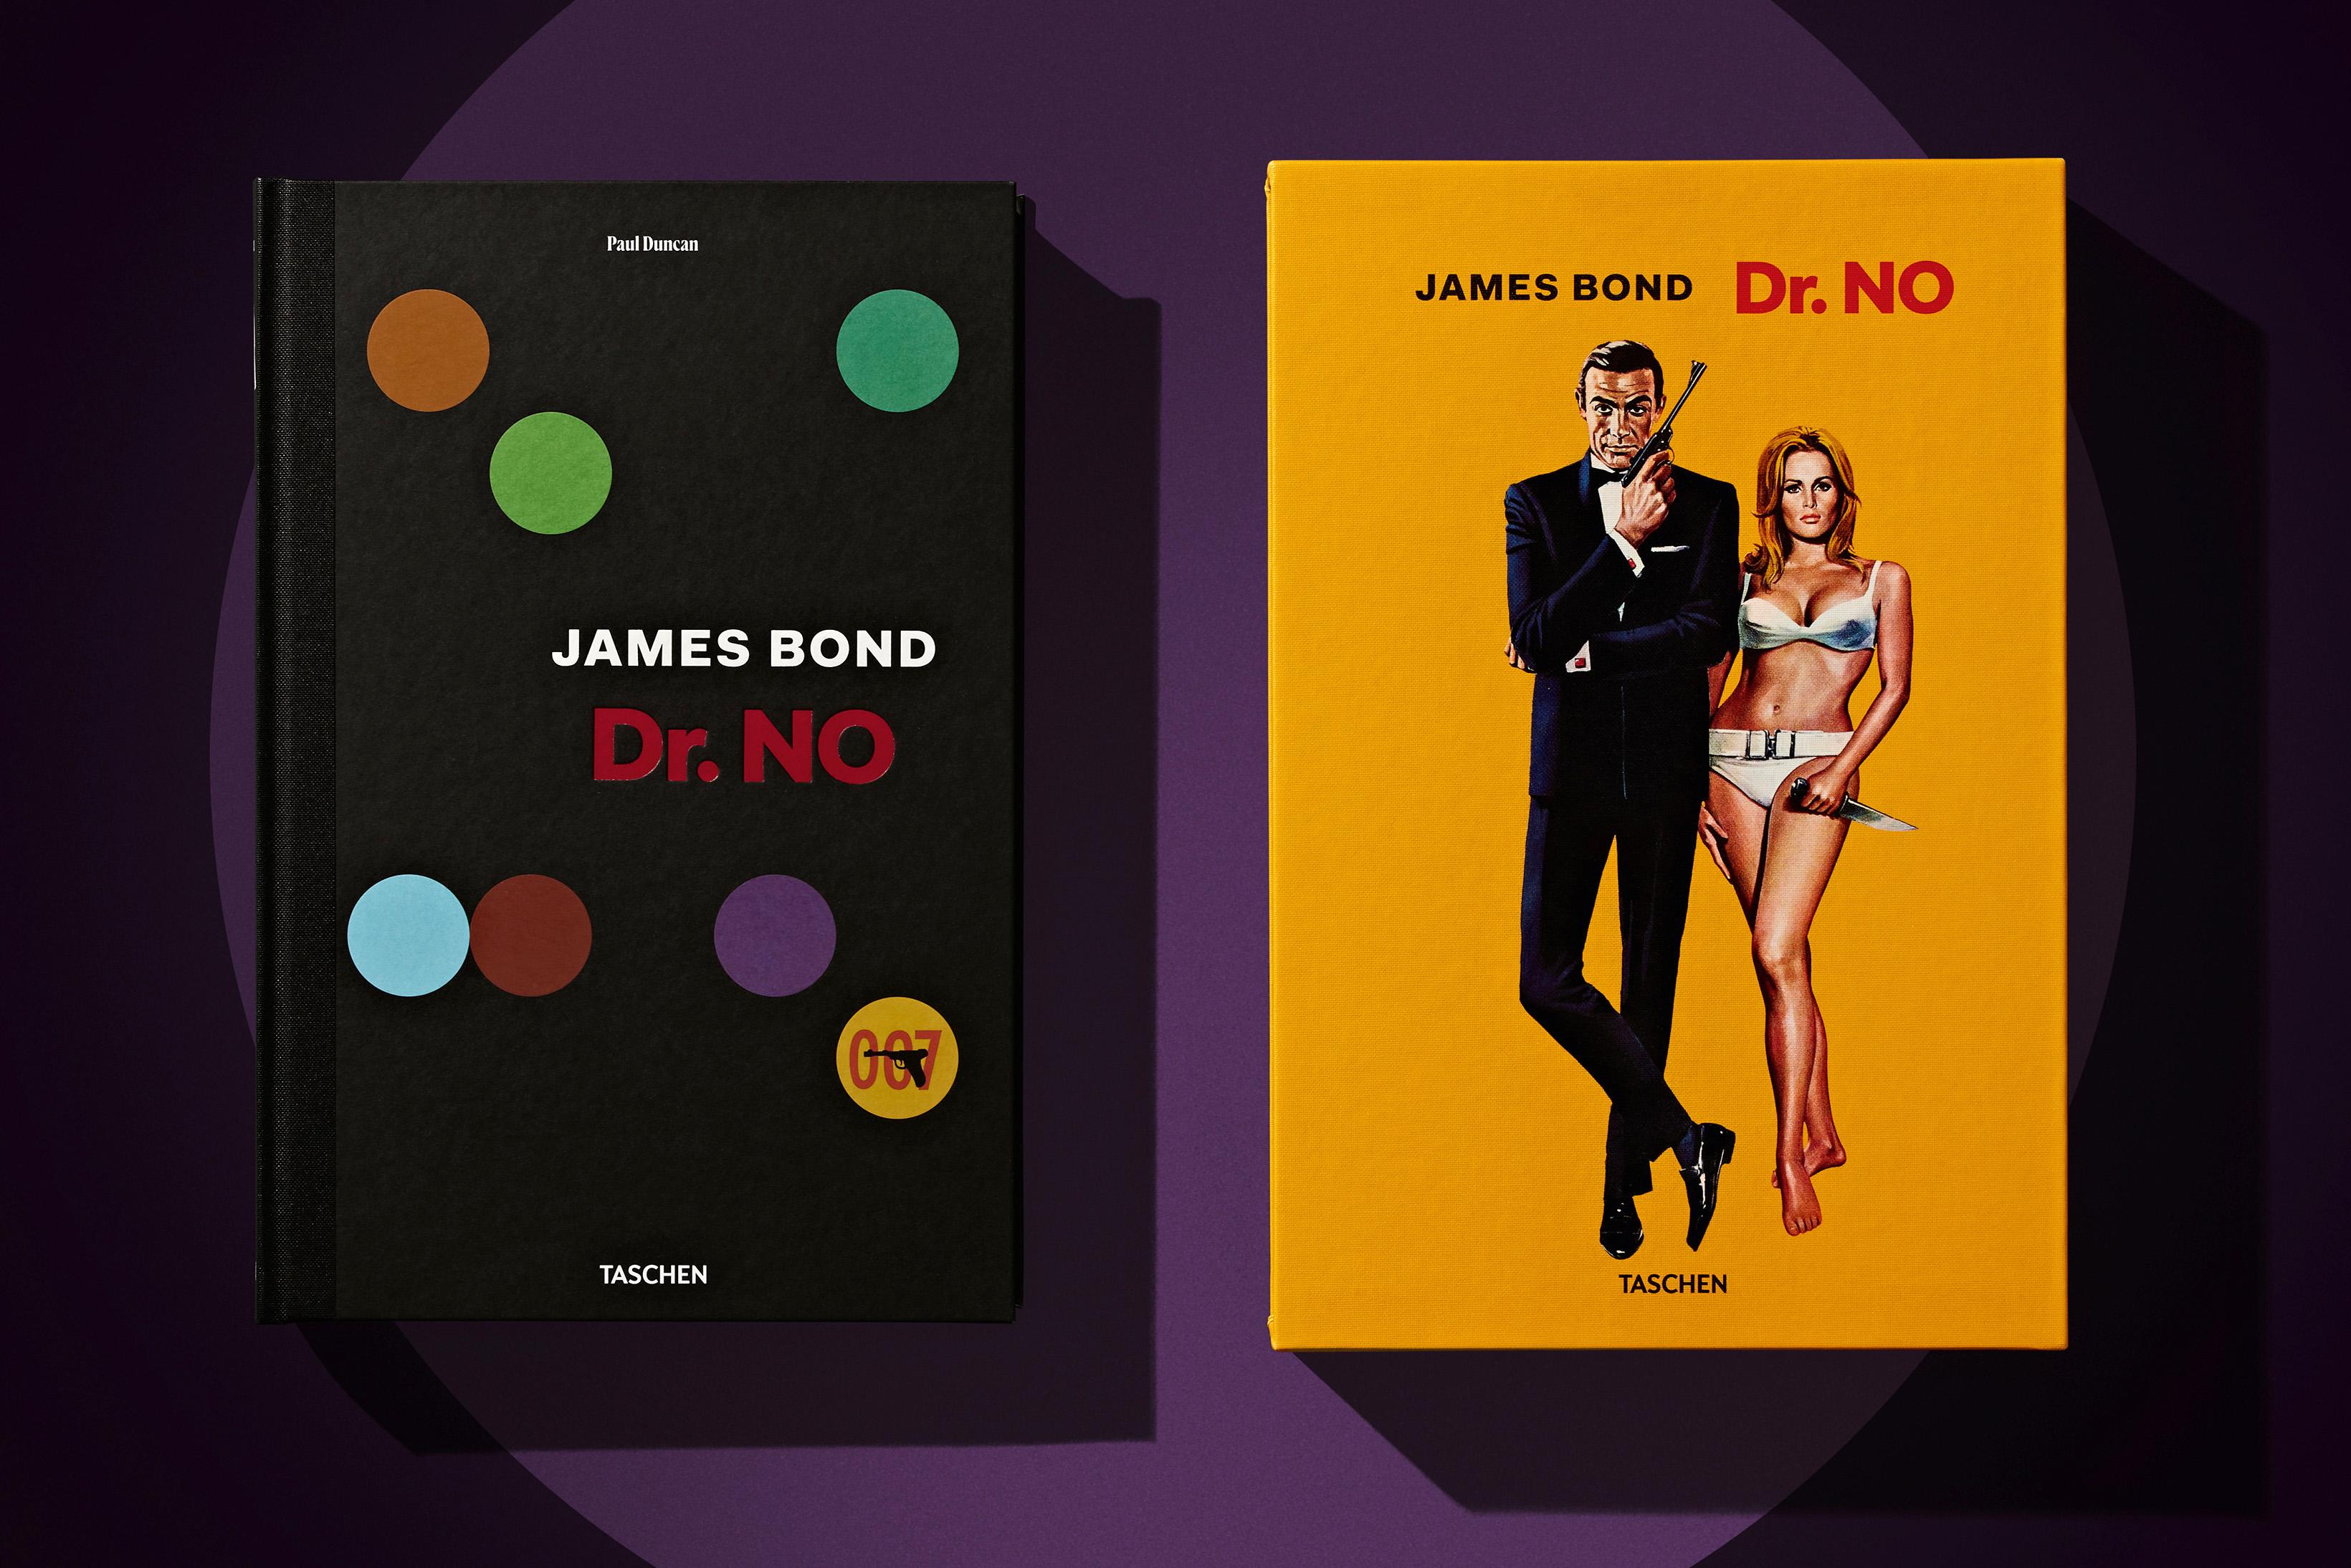 When the cinematic Bond was born.

The most complete account of the making of the first James Bond film, Dr. No (1962).

“Bond, James Bond.” Since Sean Connery uttered those immortal words in Dr. No, the world’s most famous secret agent in the